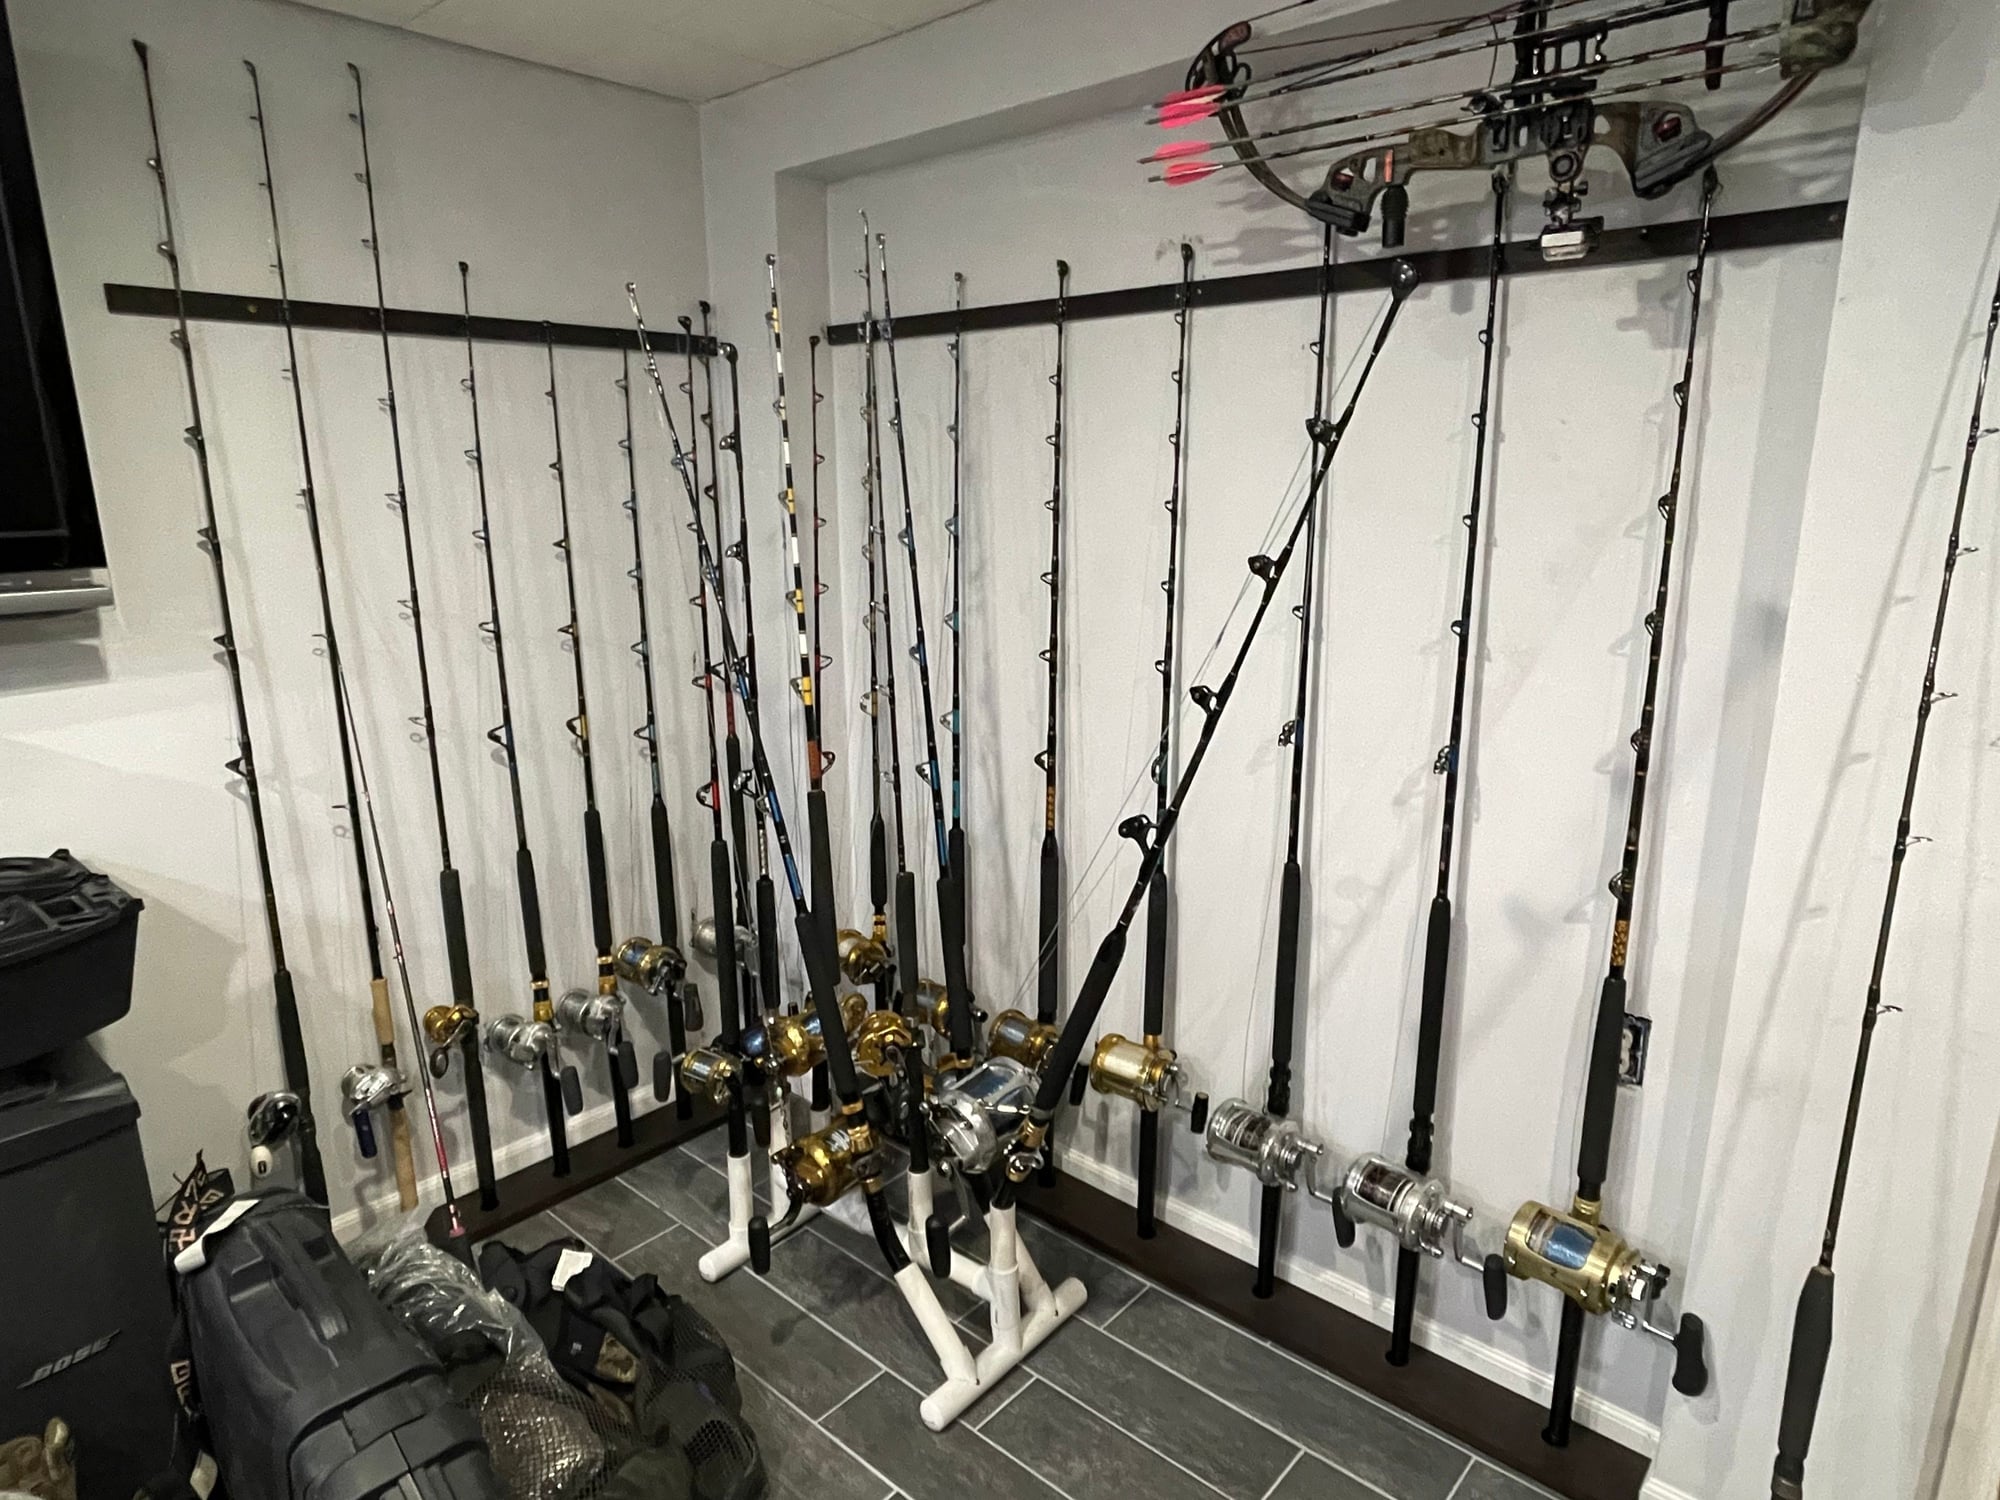 Show me your home fishing rod storage - The Hull Truth - Boating and  Fishing Forum